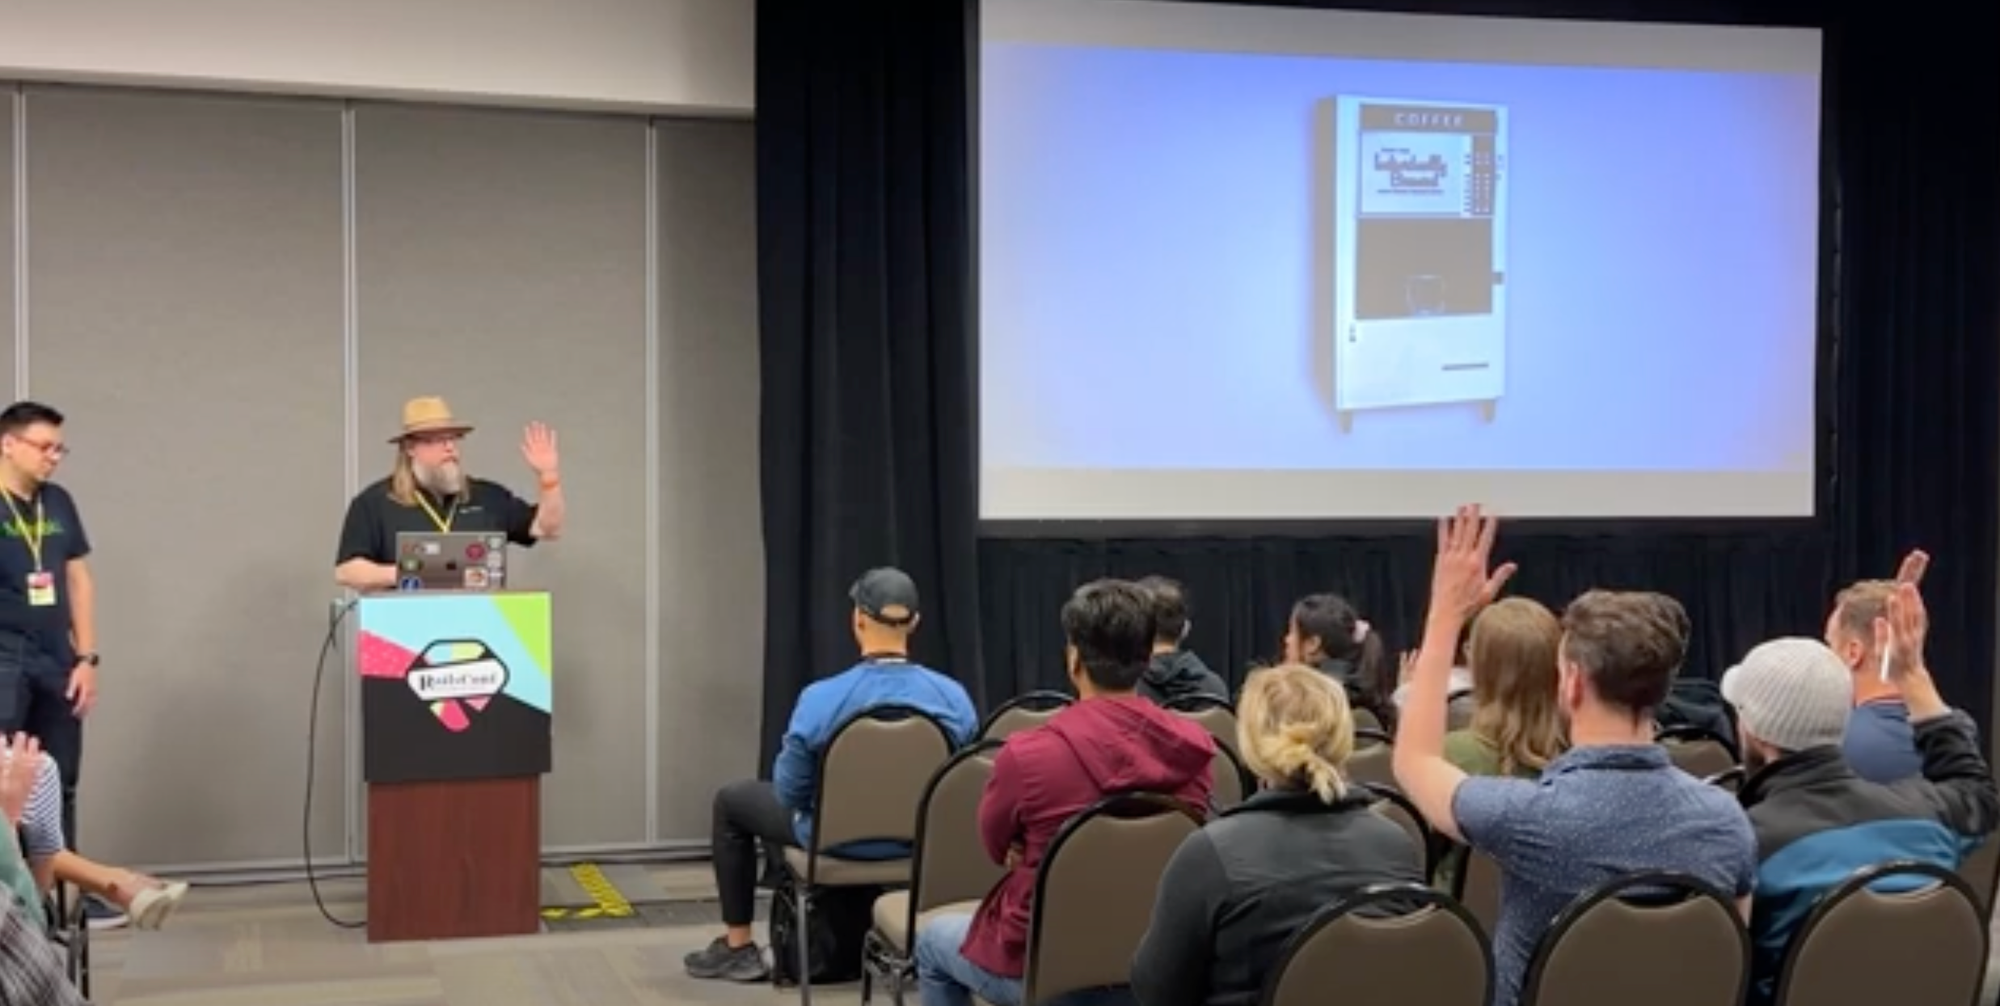 Fito von Zastrow (standing to the left) and Alan Ridlehoover (standing behind RailsConf 2023 lectern) with a picture of a mechanical coffee machine on screen. 